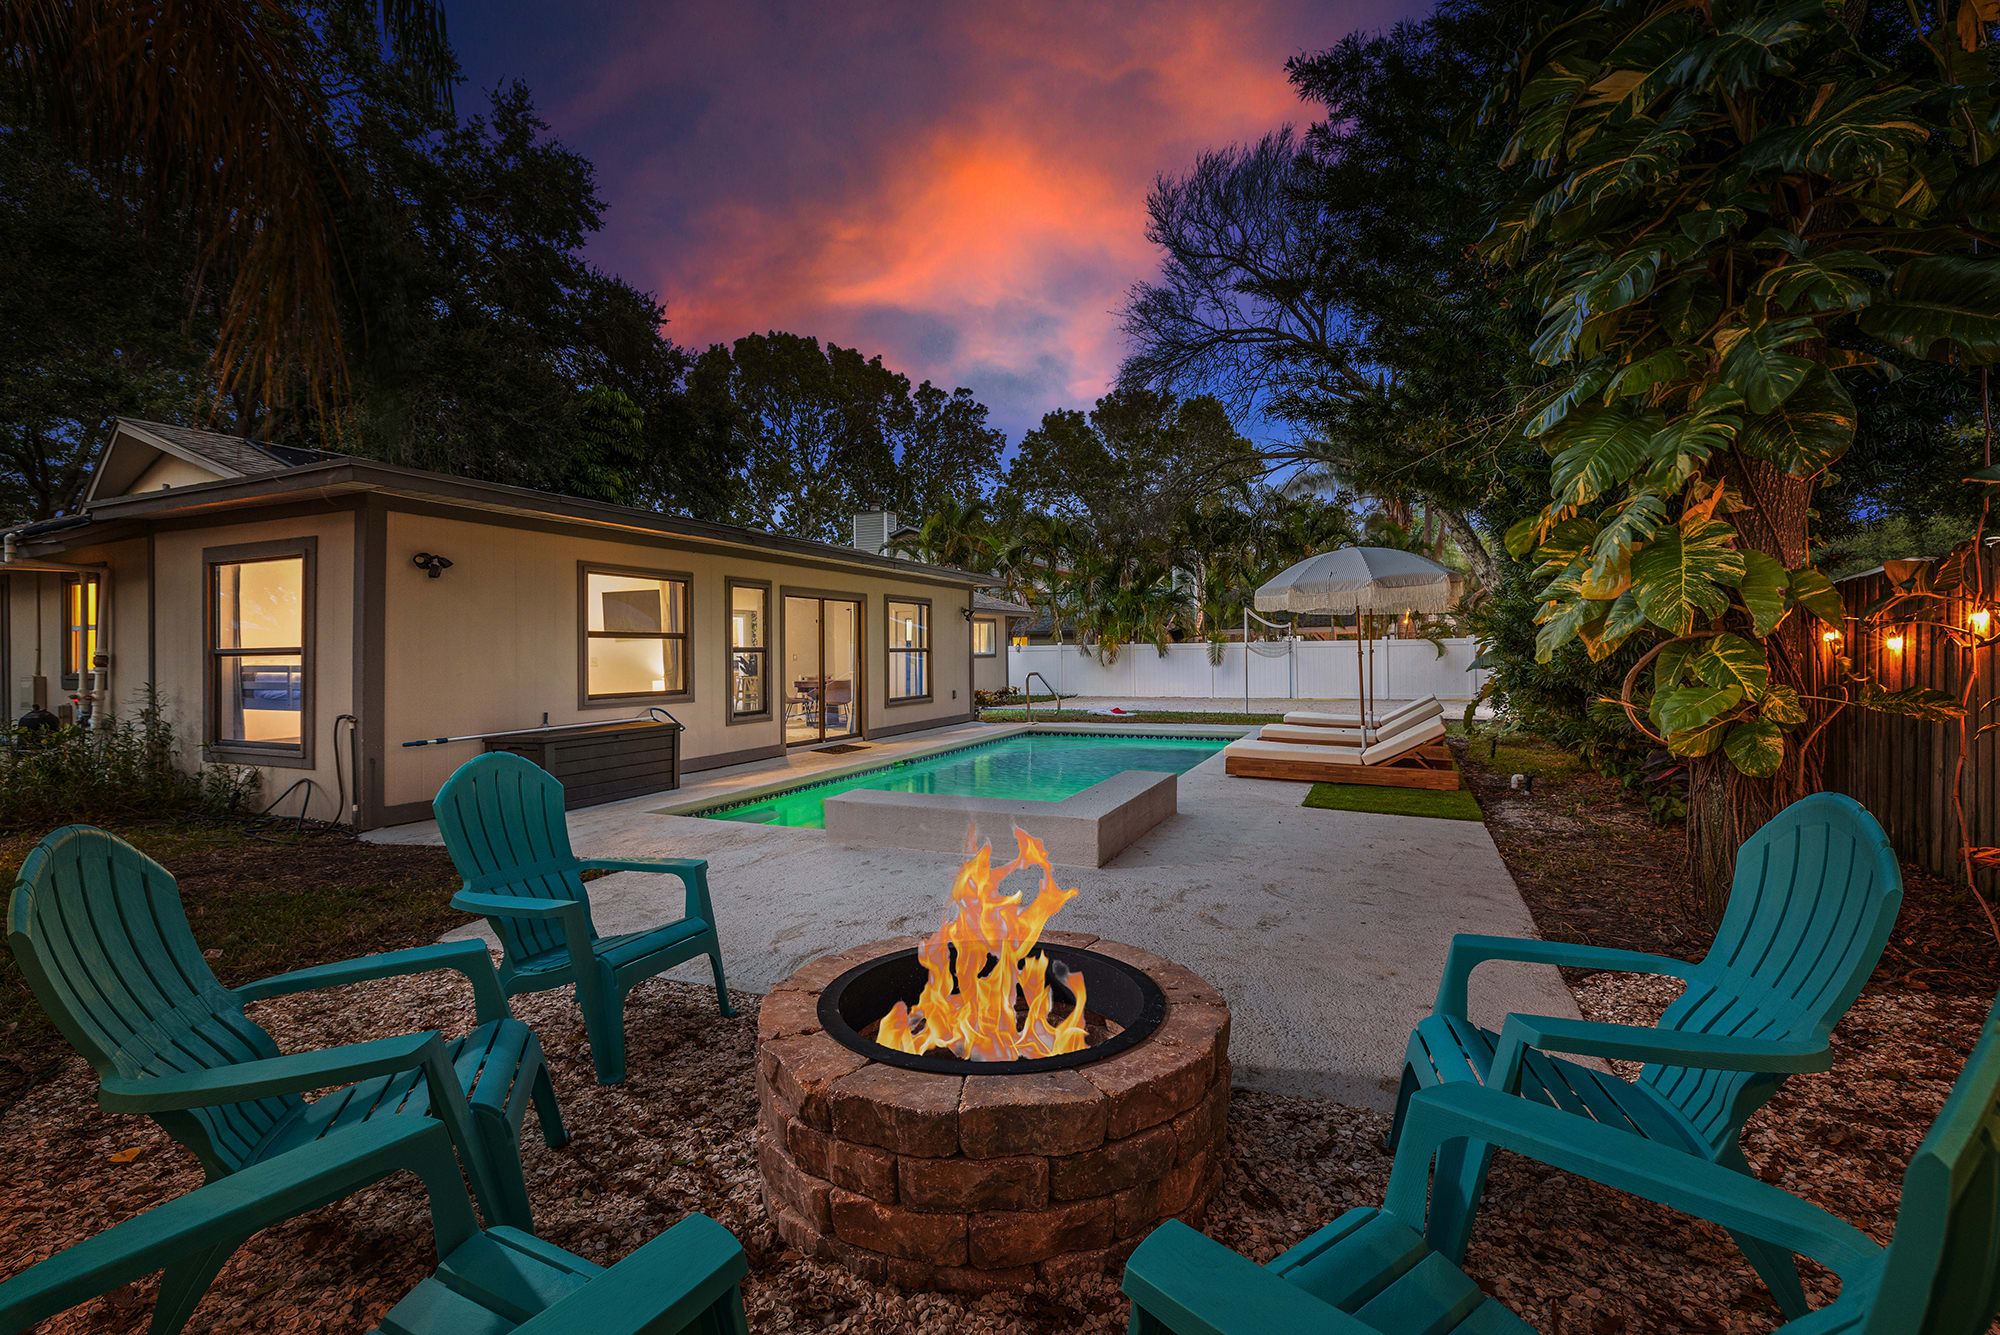 The fireplace vibes with the lighted pool at night will be awesome this winter